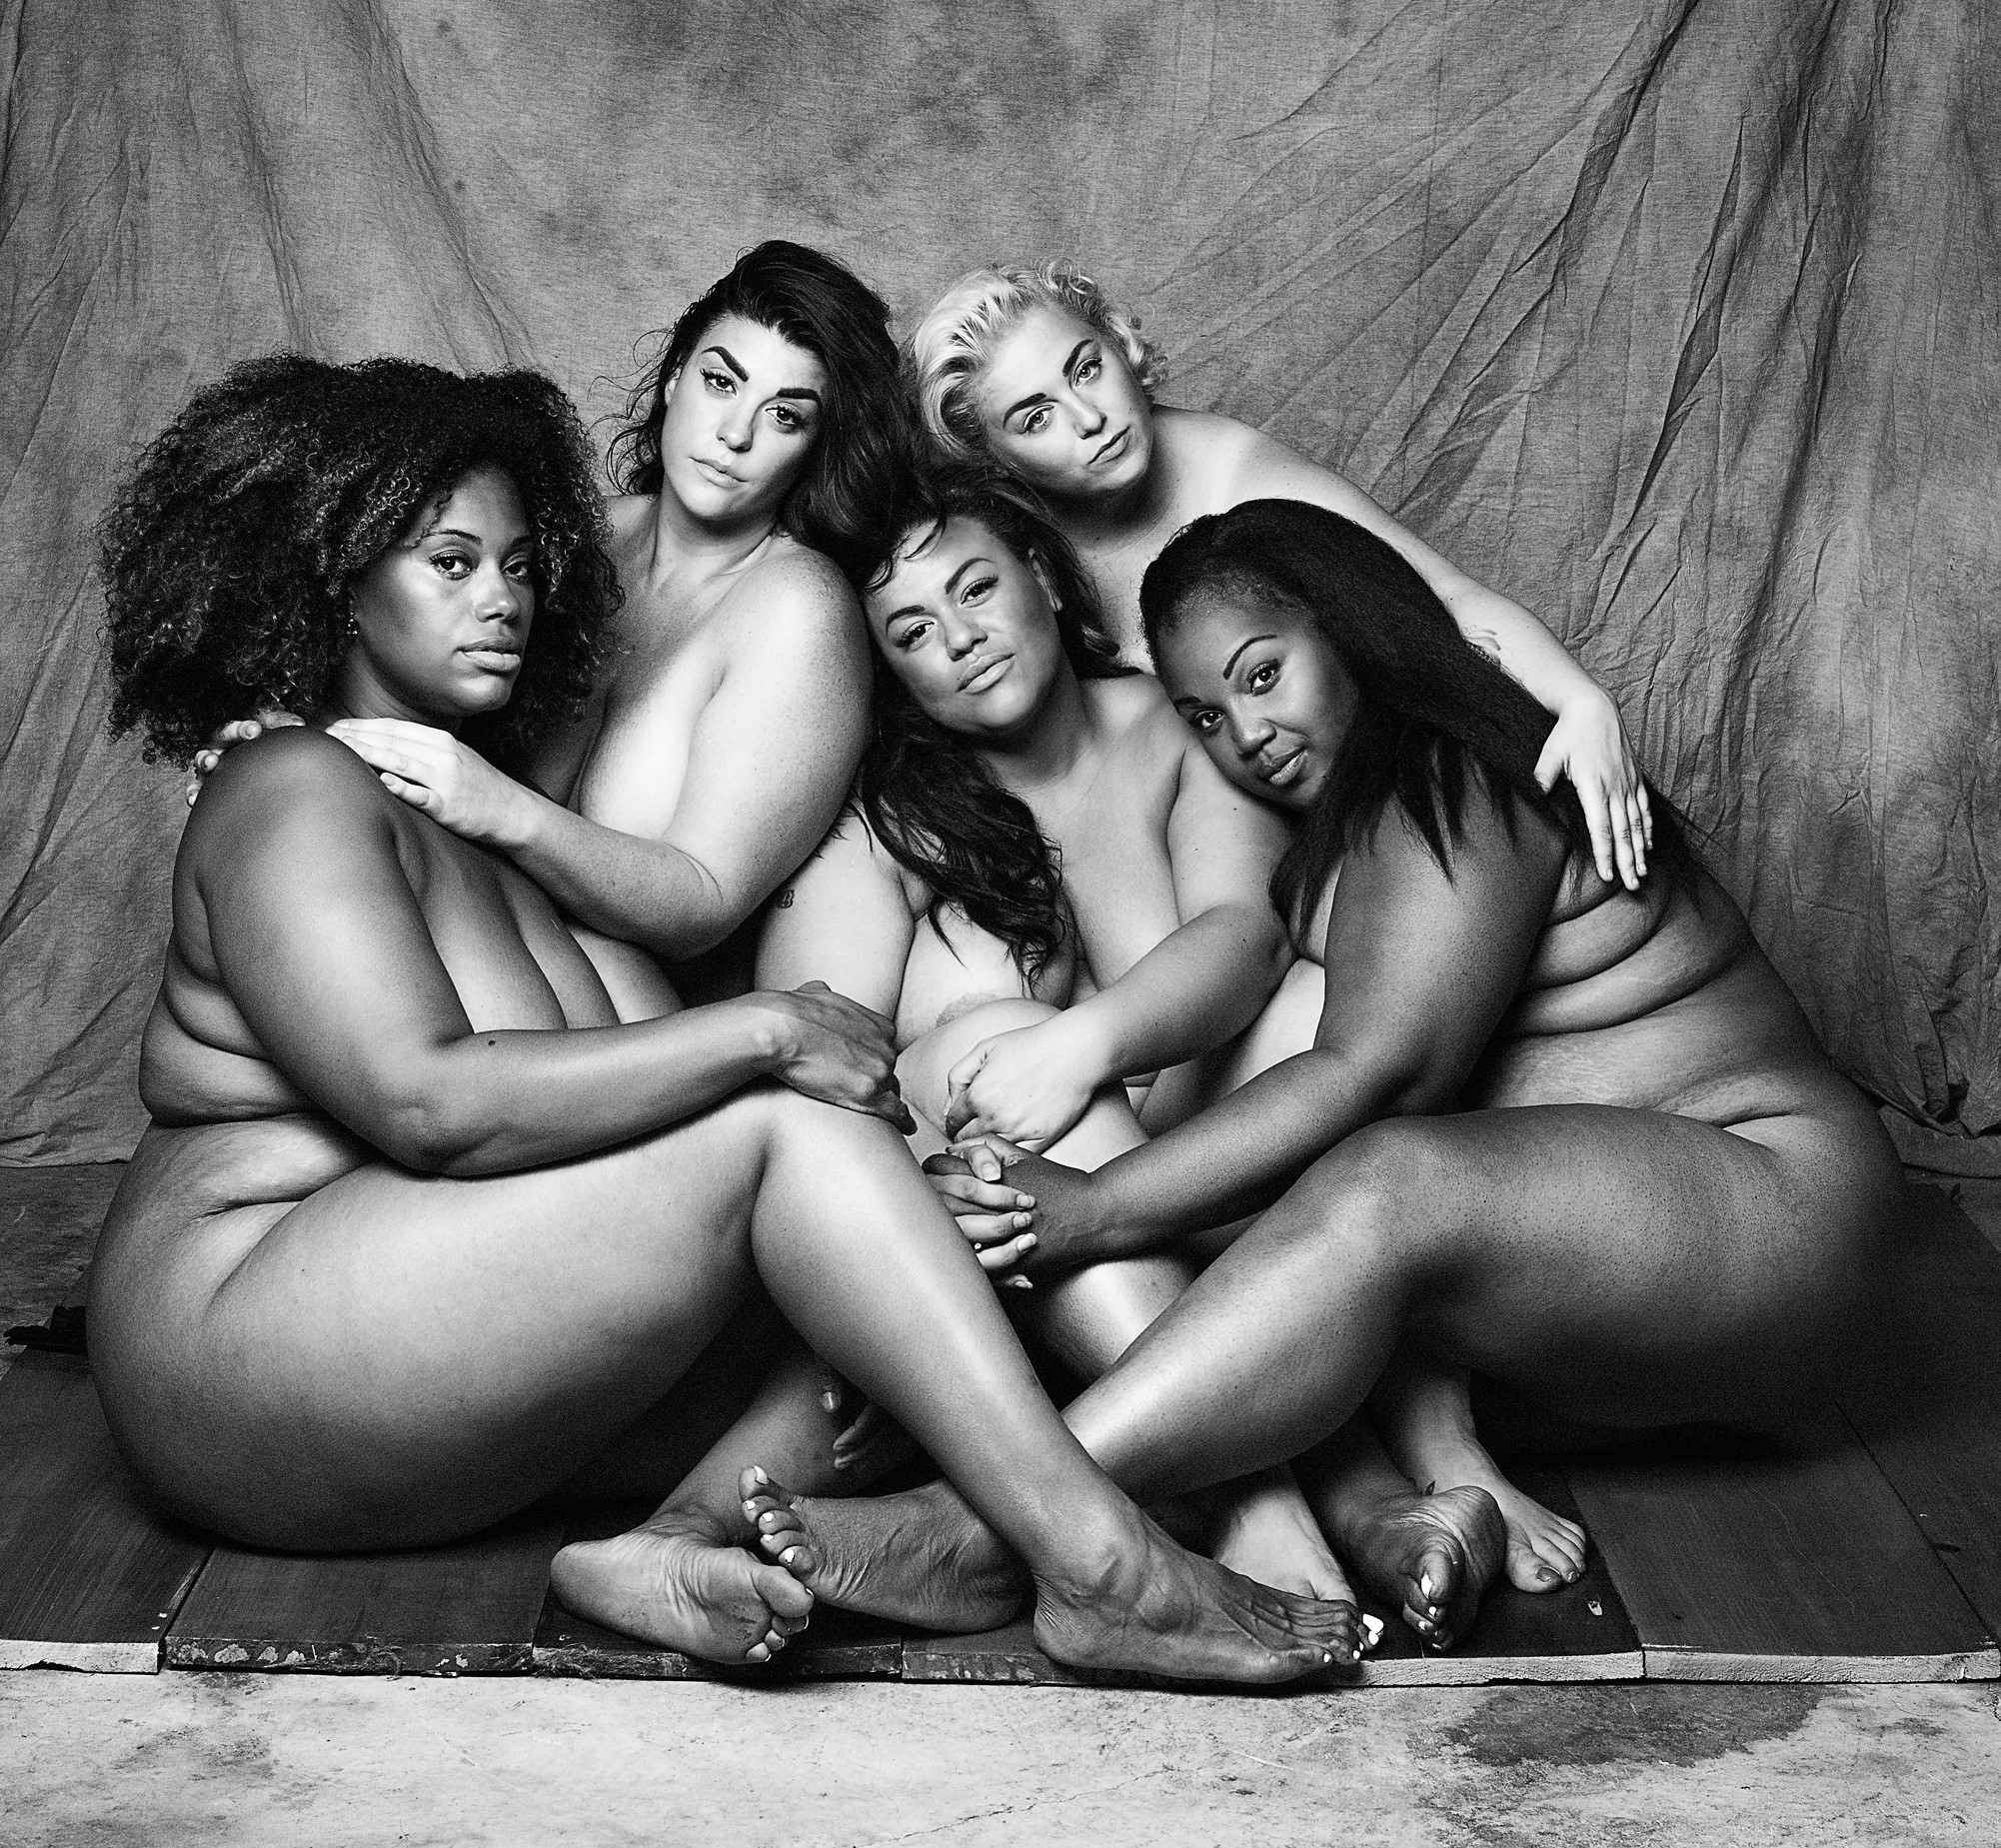 Super SHEroes – a Mission of Body Acceptance